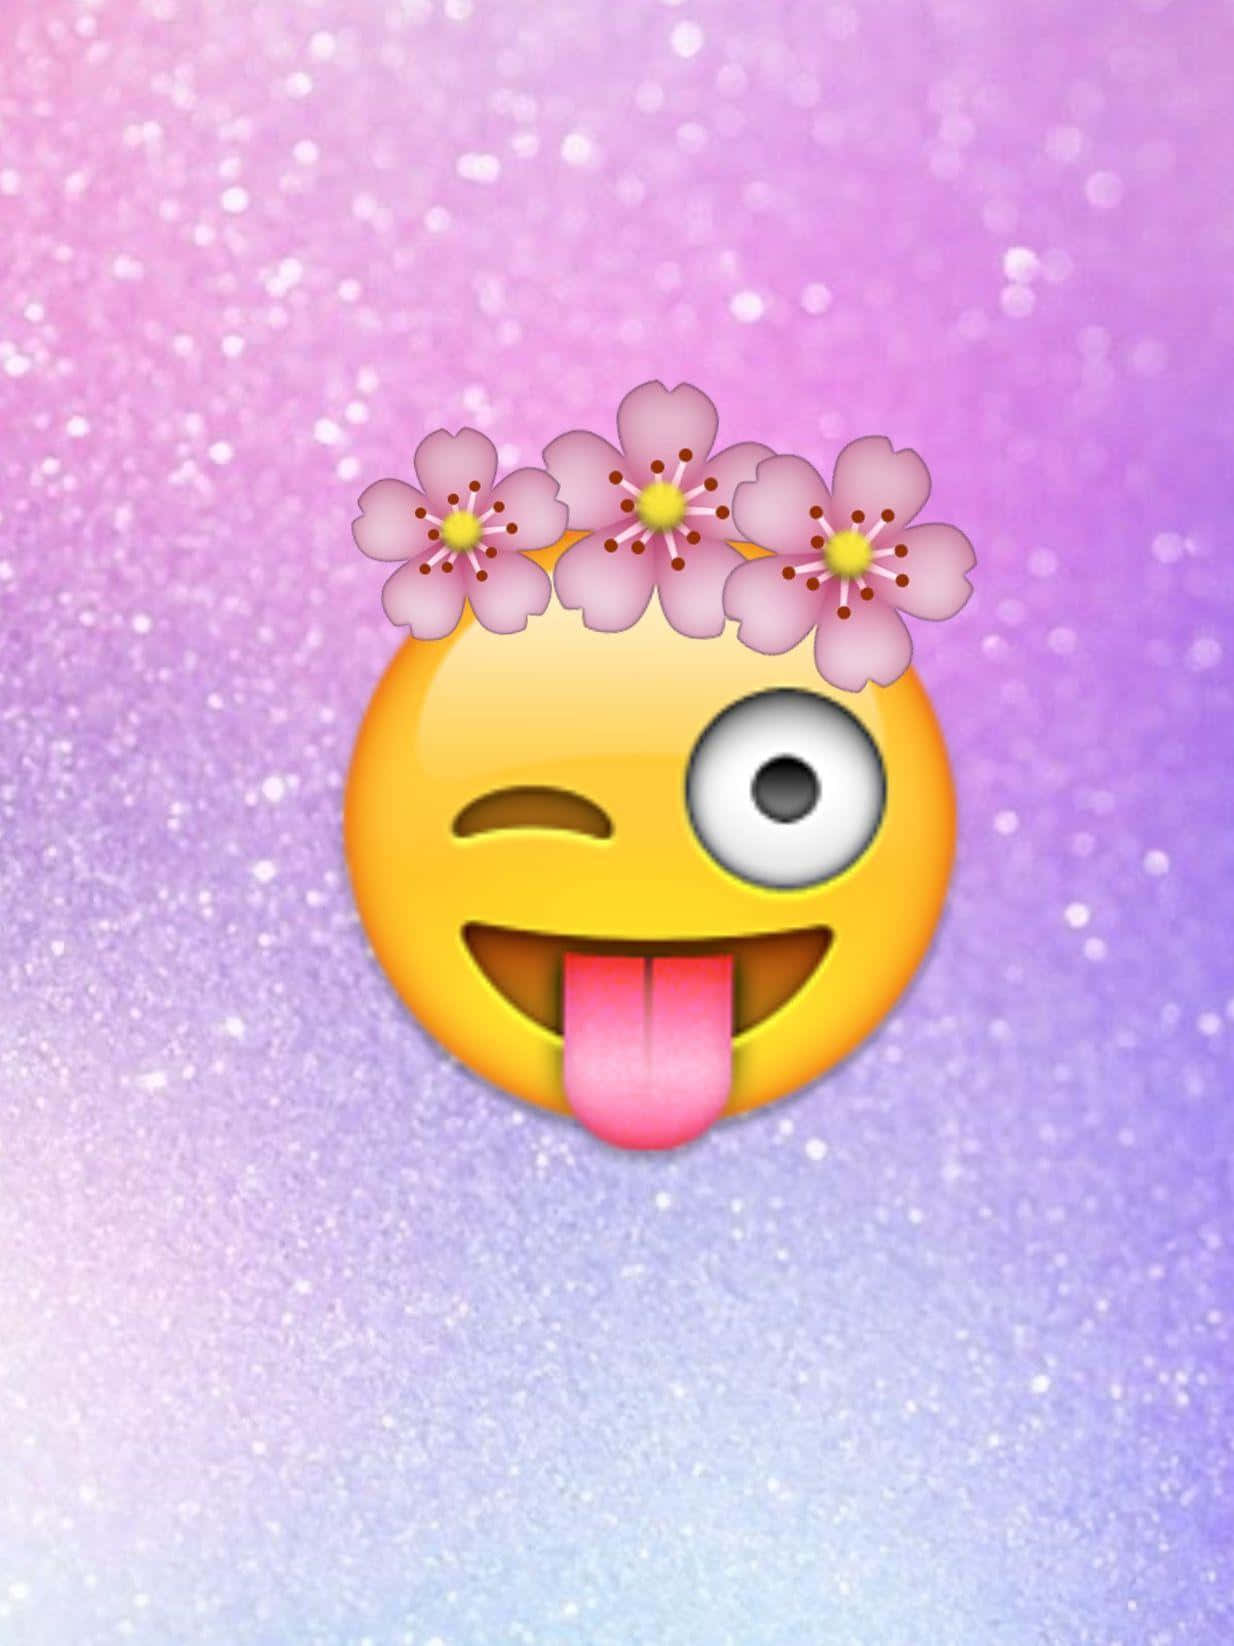 Tag Get Cute And Cheerful With These Fun Emojis! Wallpaper